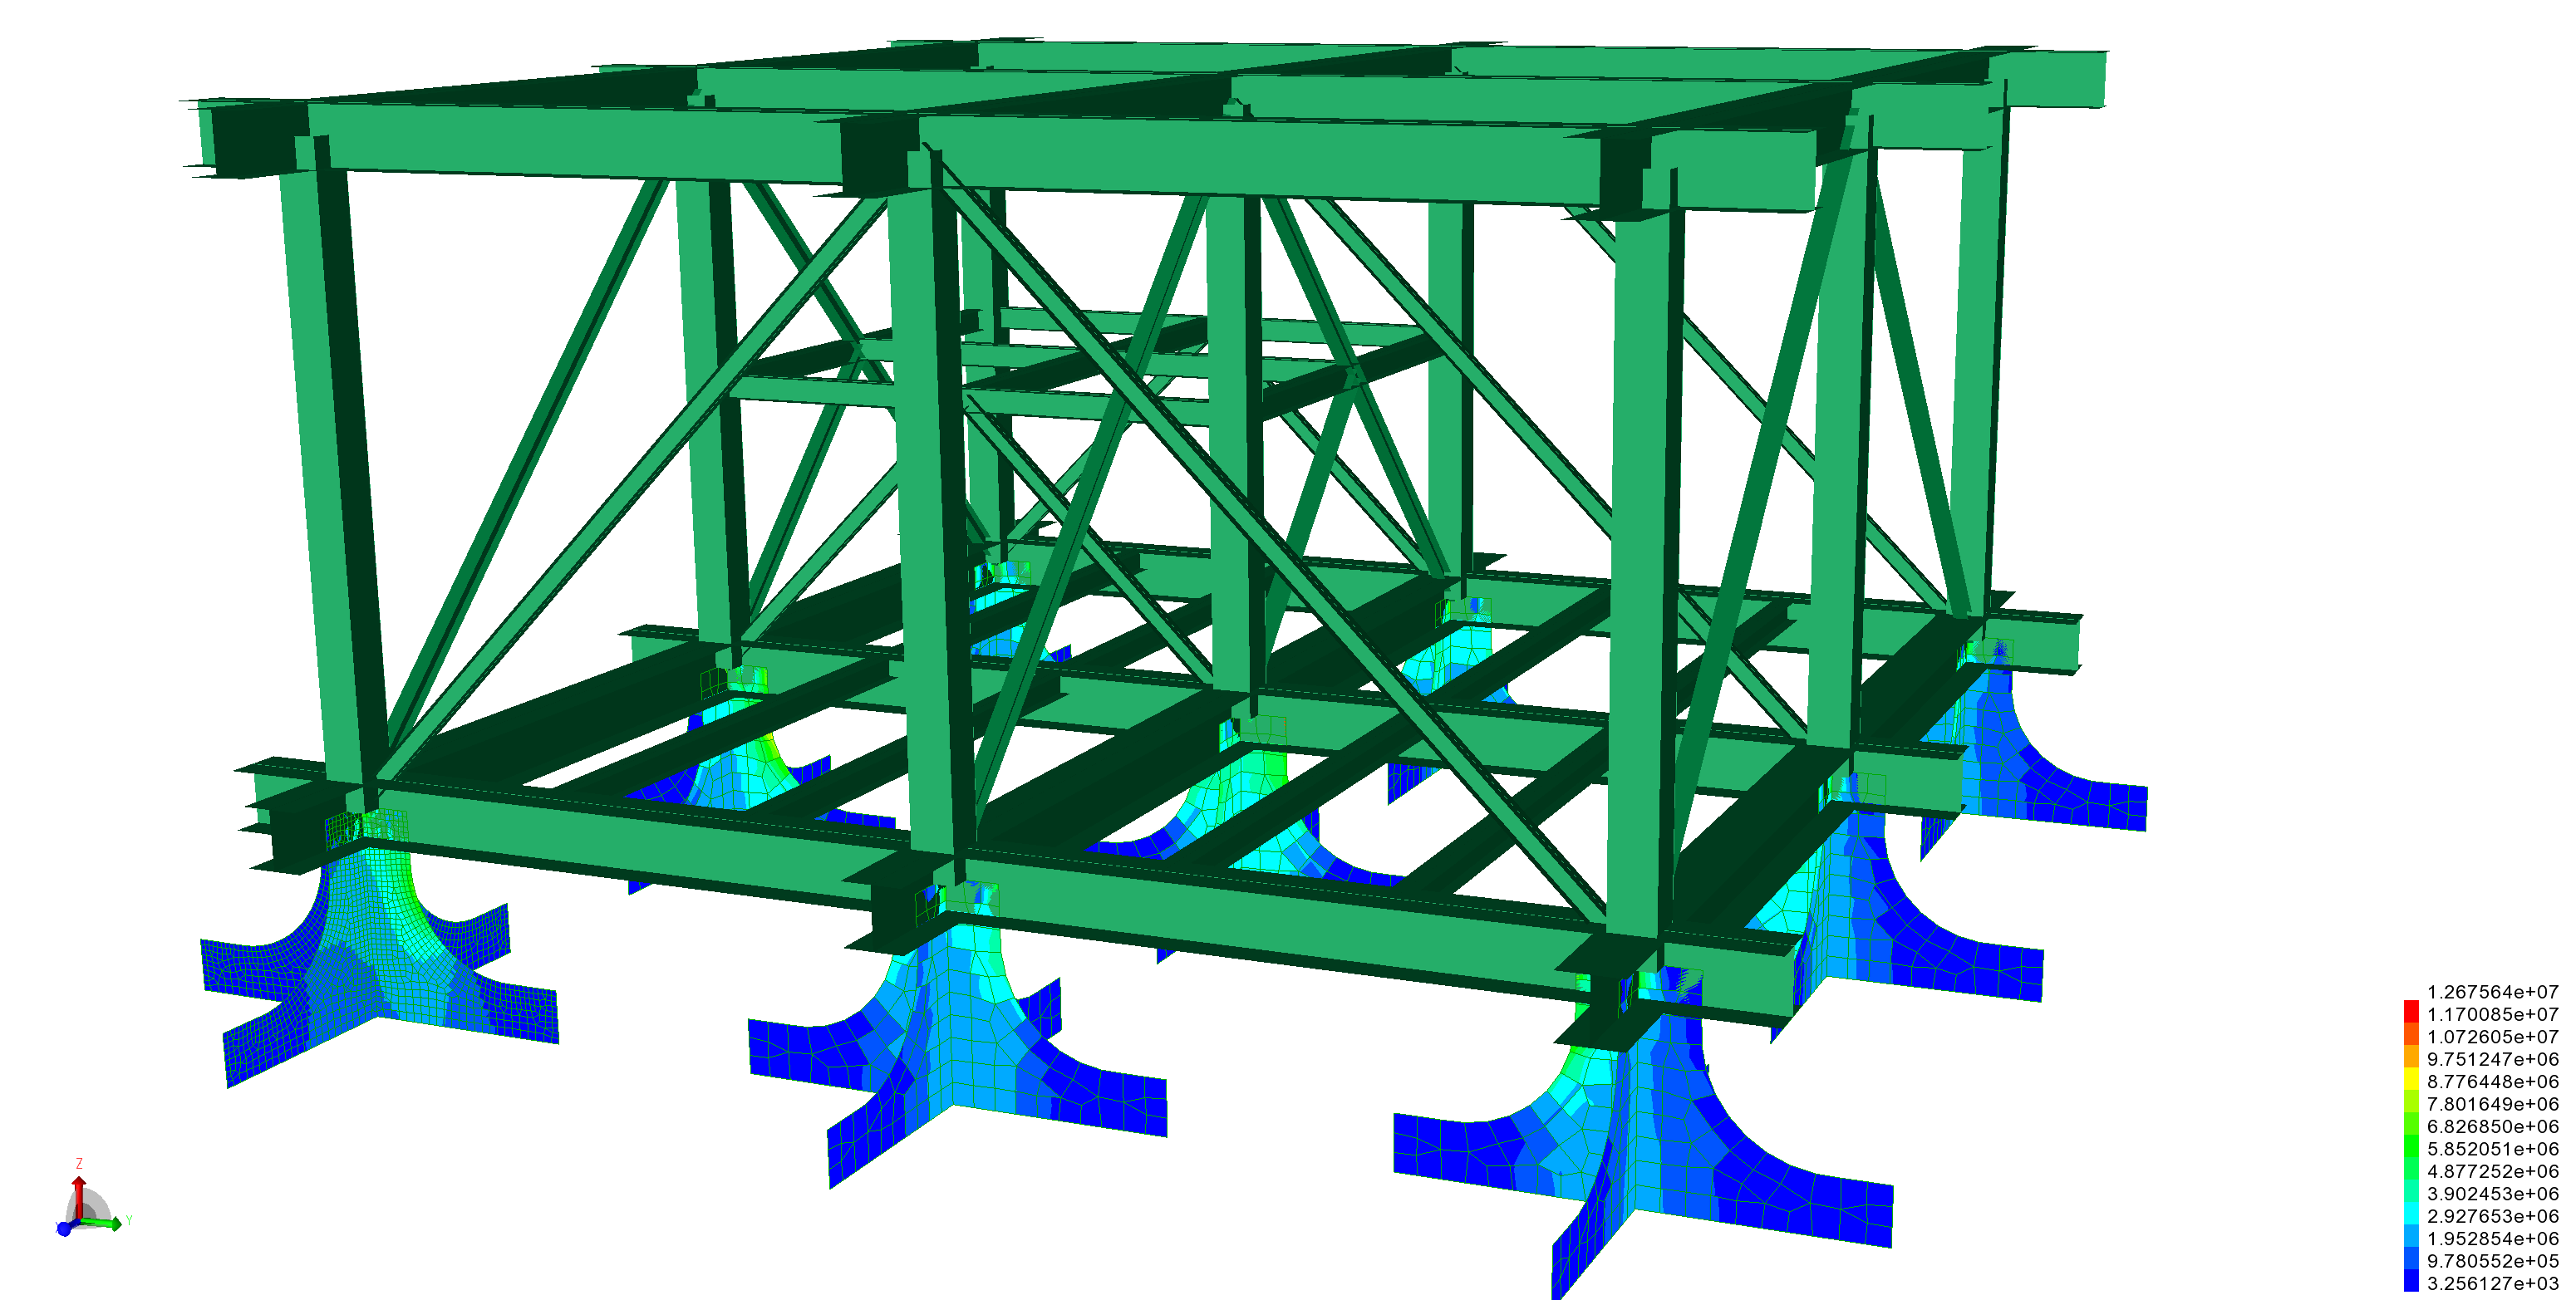 Transport & installation offshore structures - topside